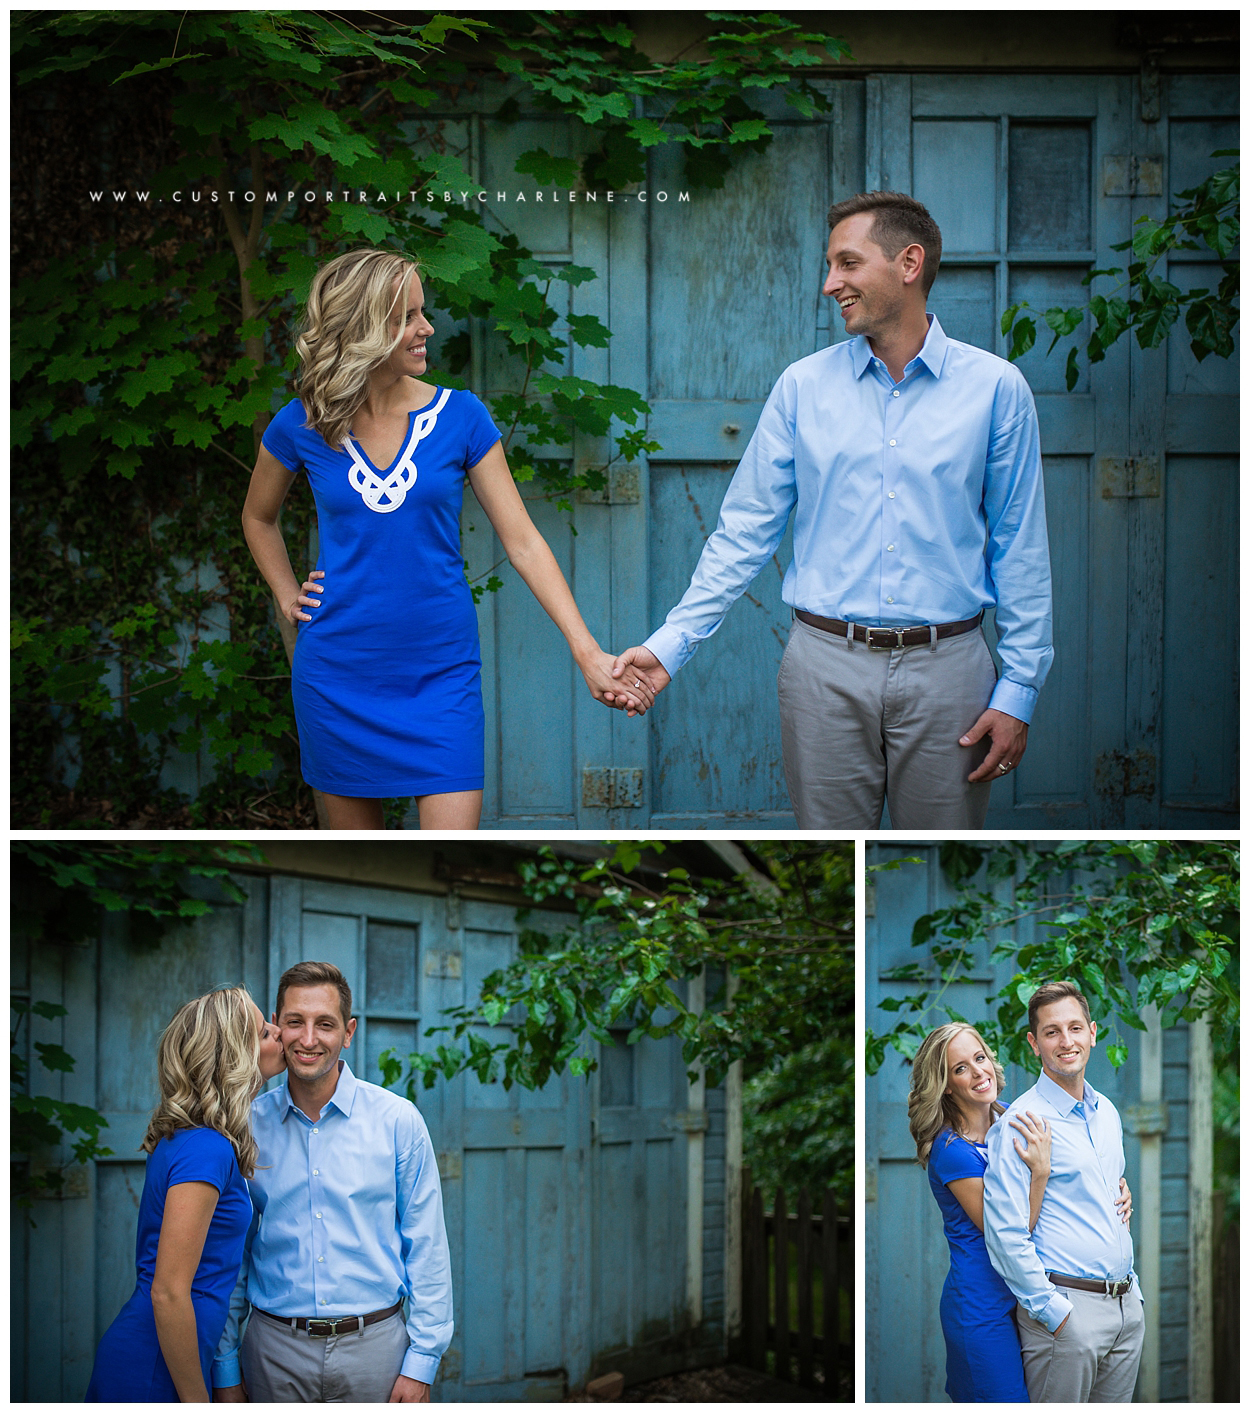 Sewickley Engagement Session - Engagement Picture Ideas - Pittsburgh Wedding Photography - Urban Rural Park Engaged5